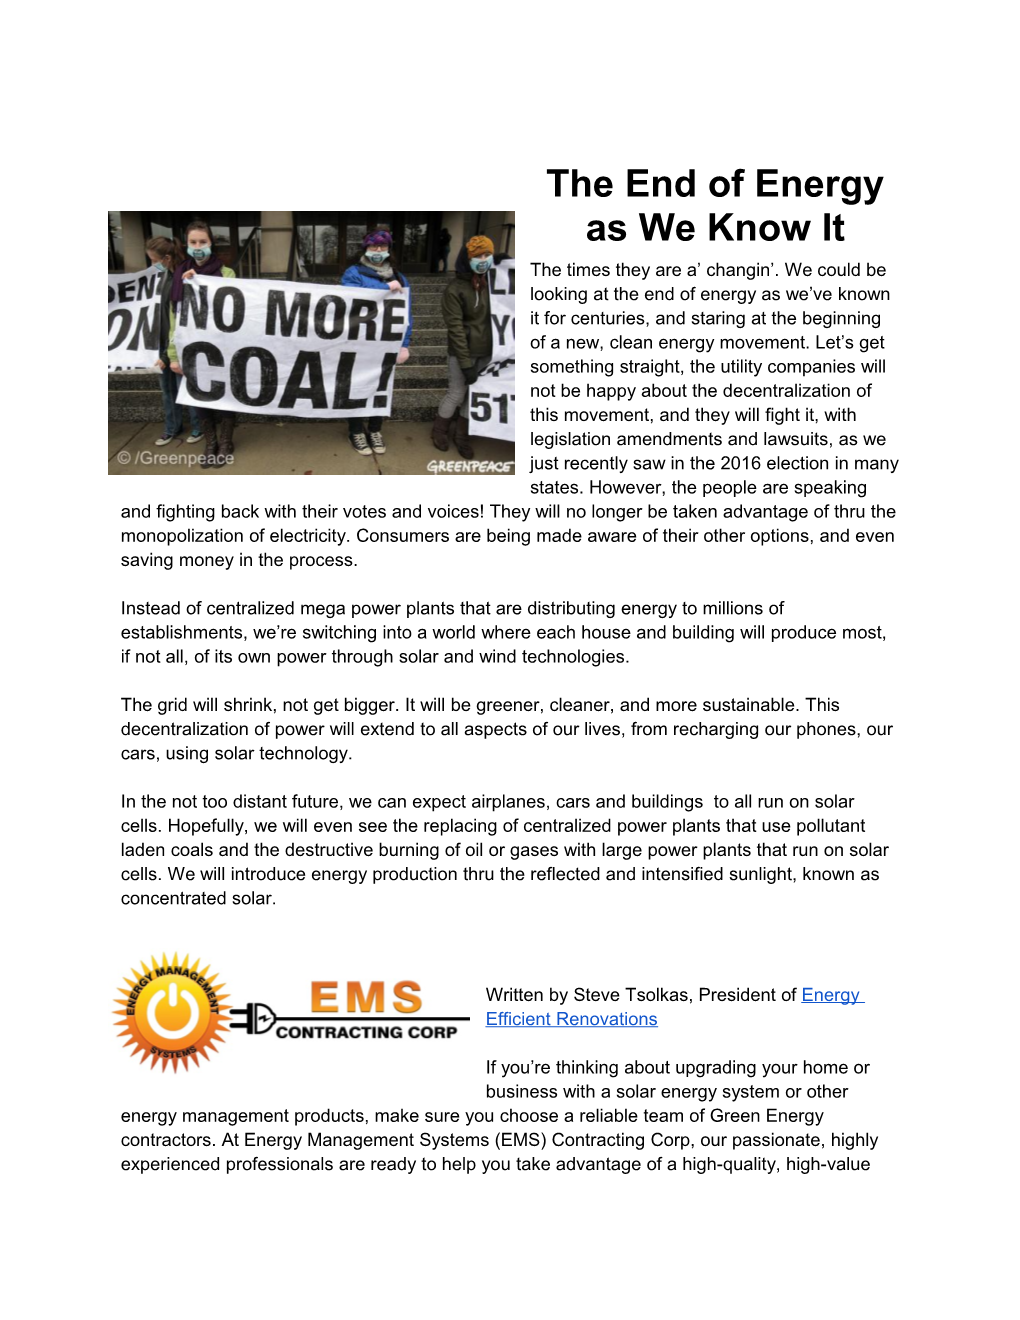 The End of Energy As We Know It